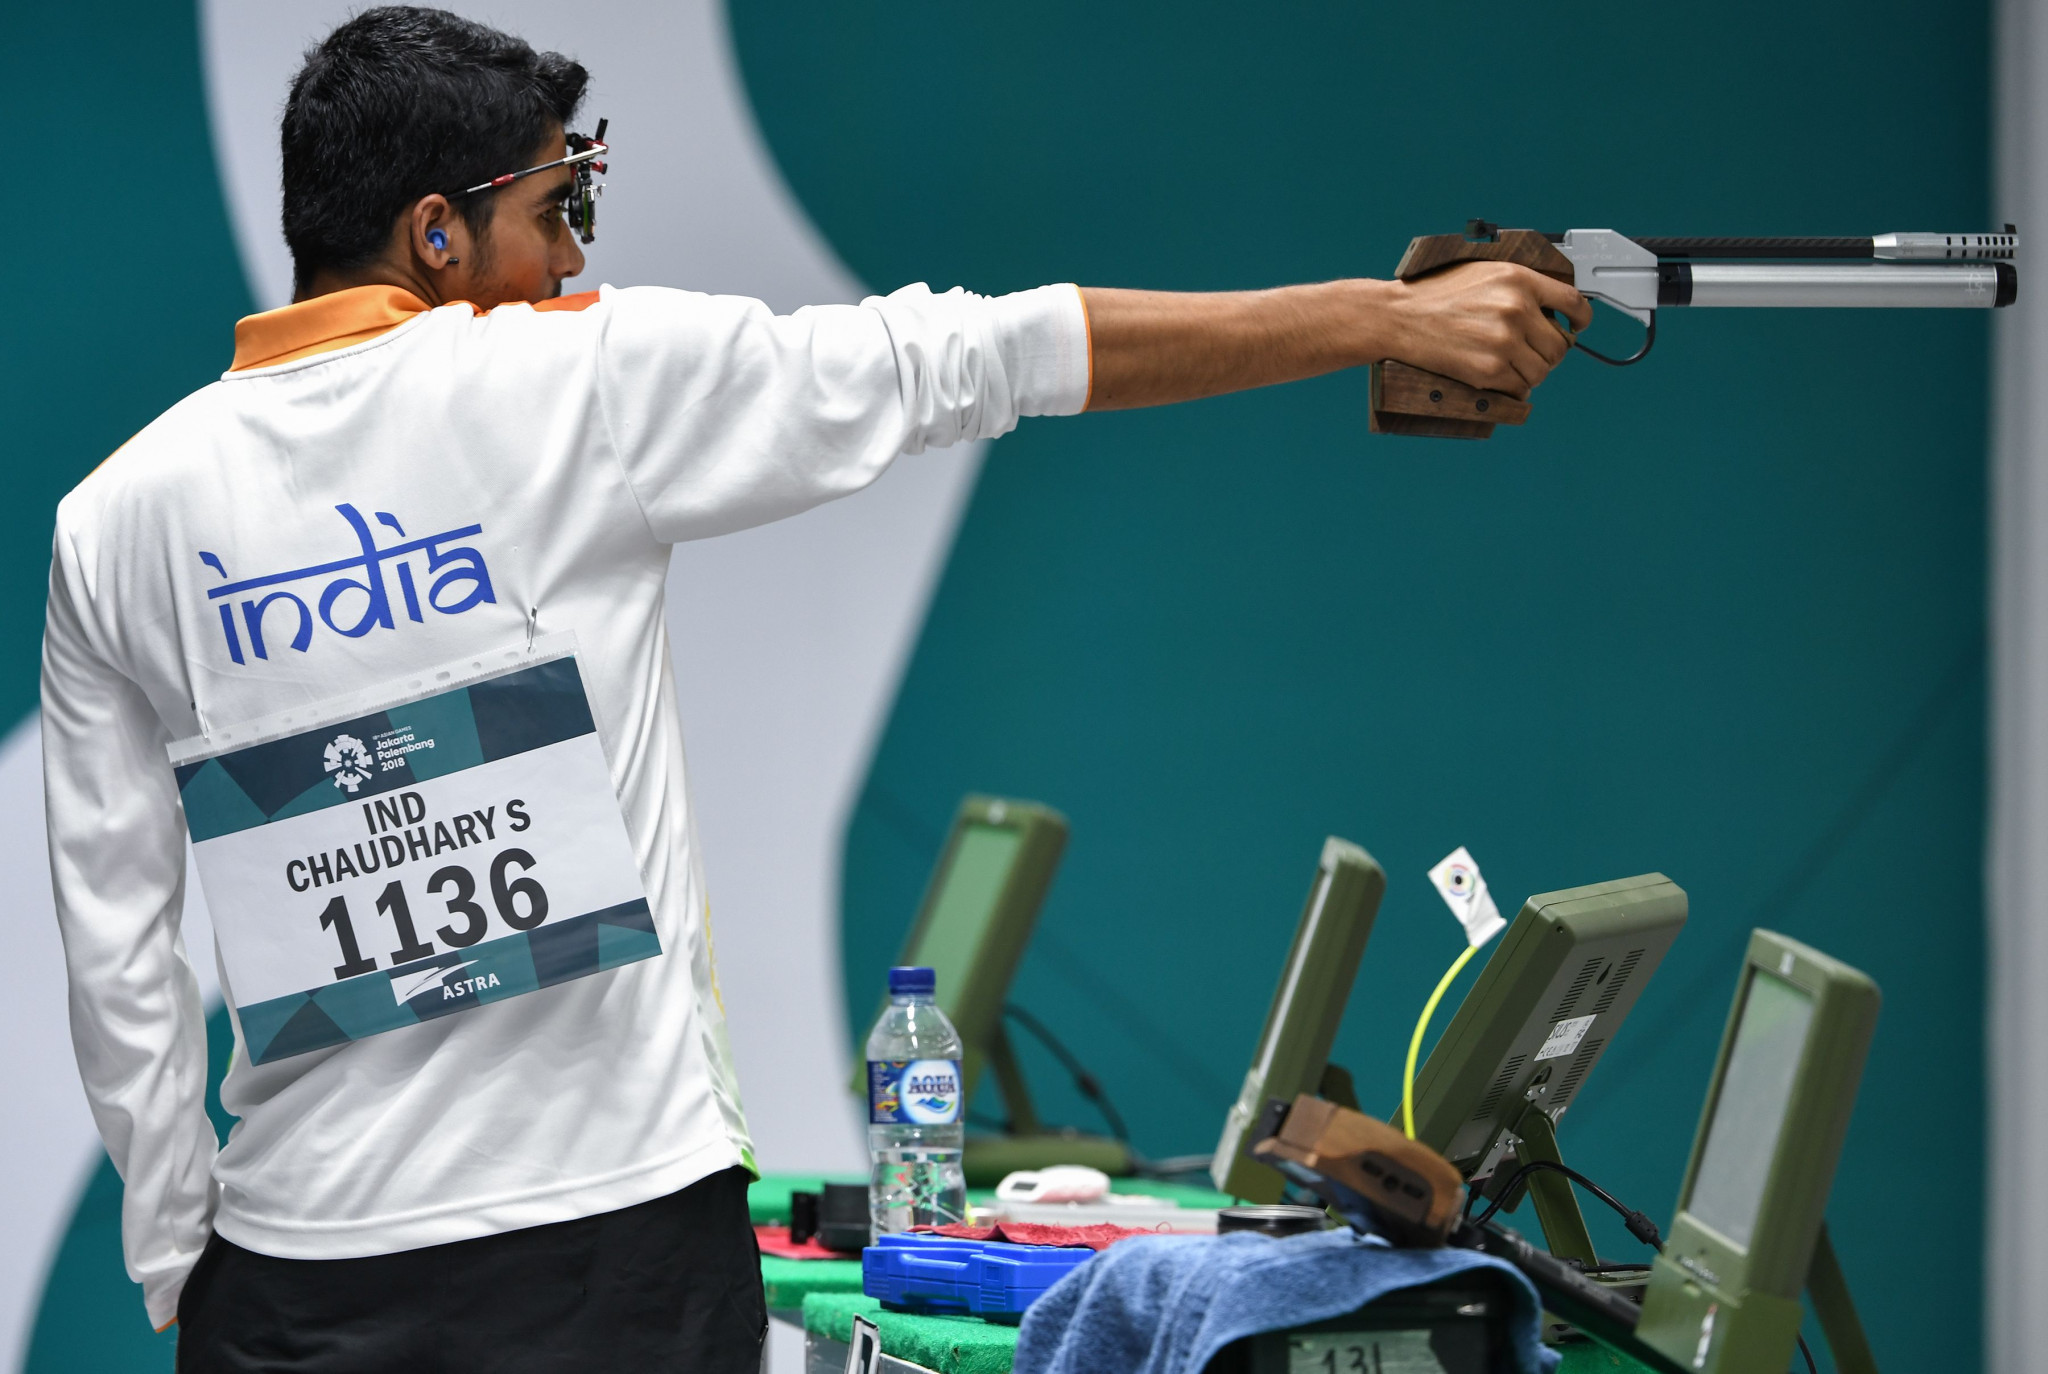 Deswal victorious at New Delhi ISSF World Cup but COVID-19 cases increase